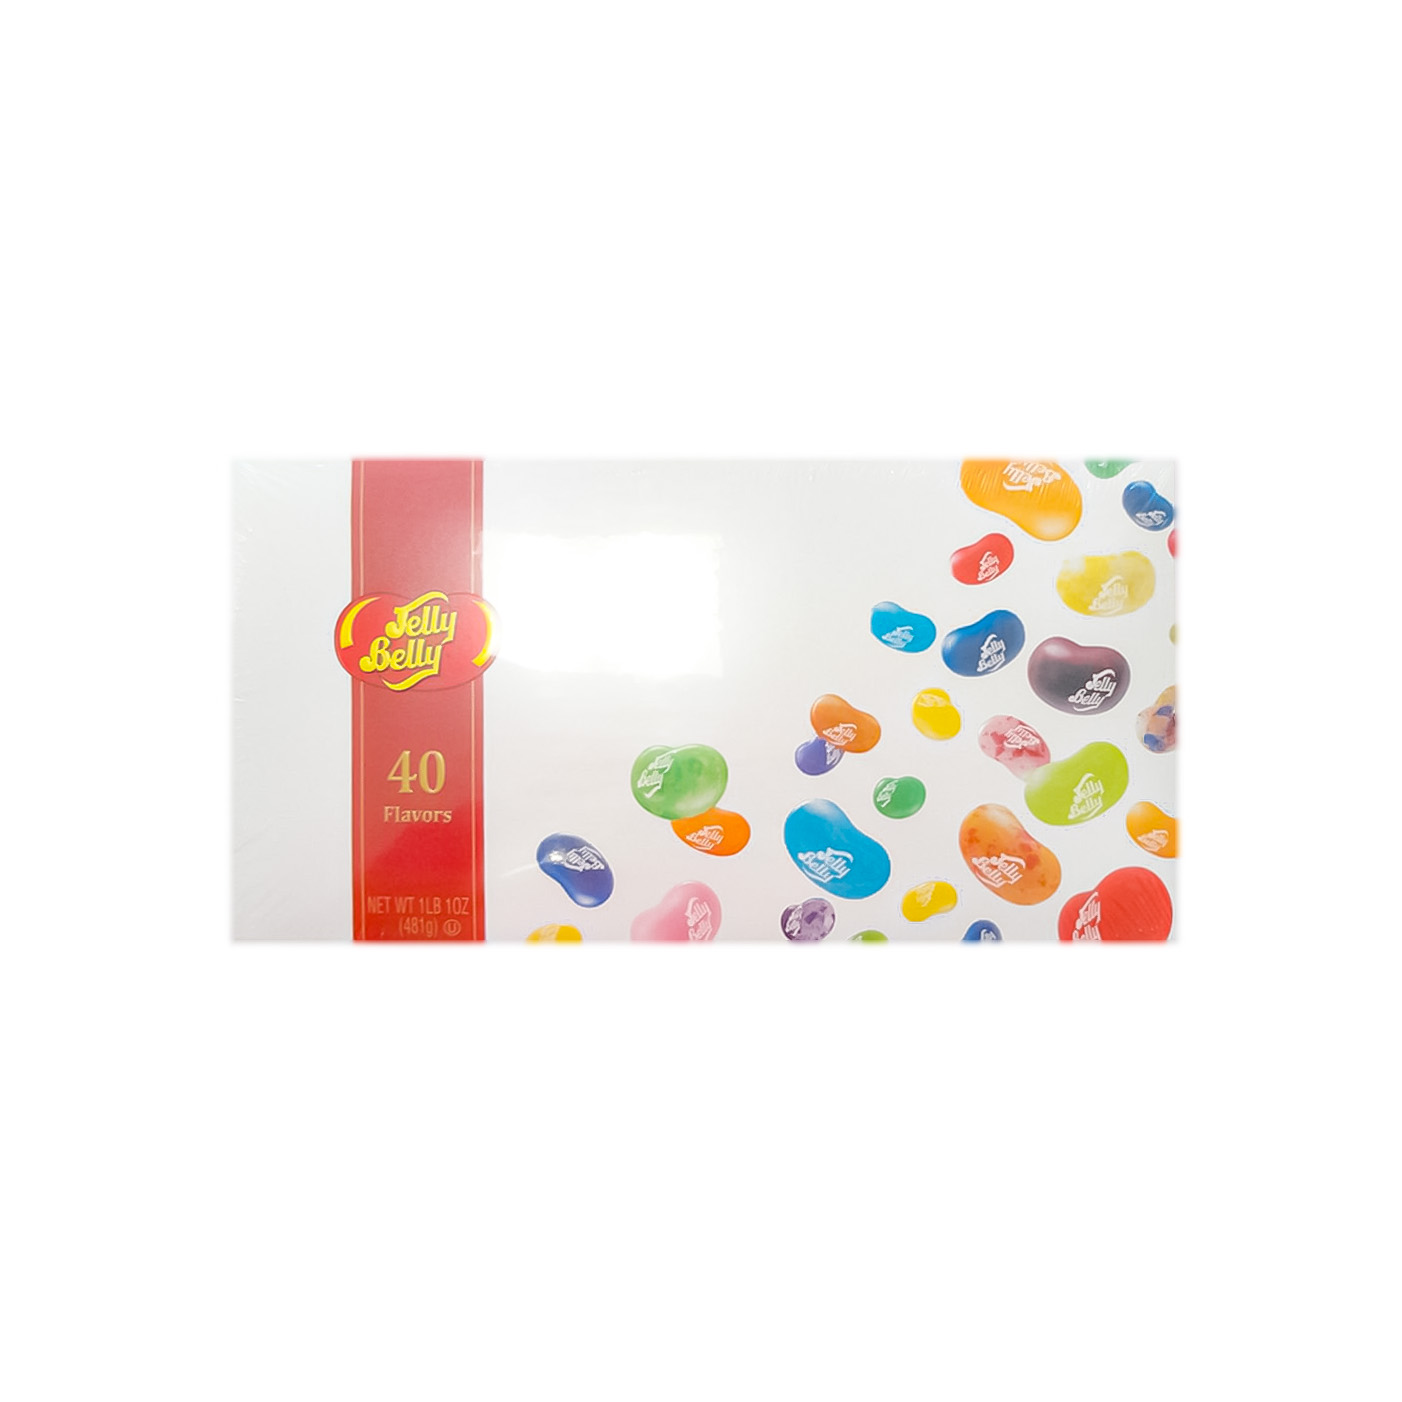 40 flavor jelly belly